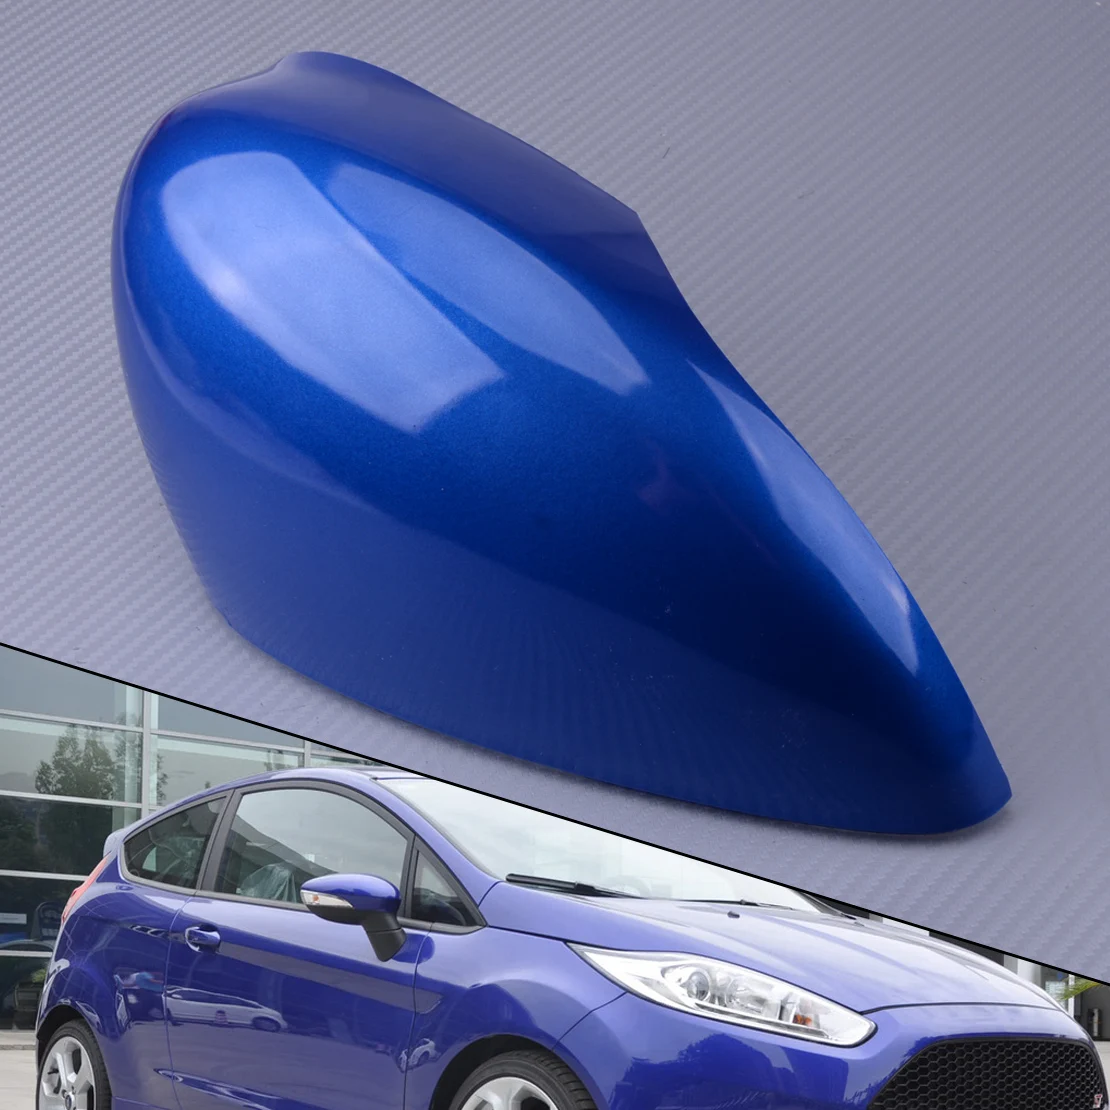 Right Wing Door Rearview Side Mirror Cover Cap ABS Blue Fit for Ford Fiesta MK7 2008-2014 2015 2016 2017